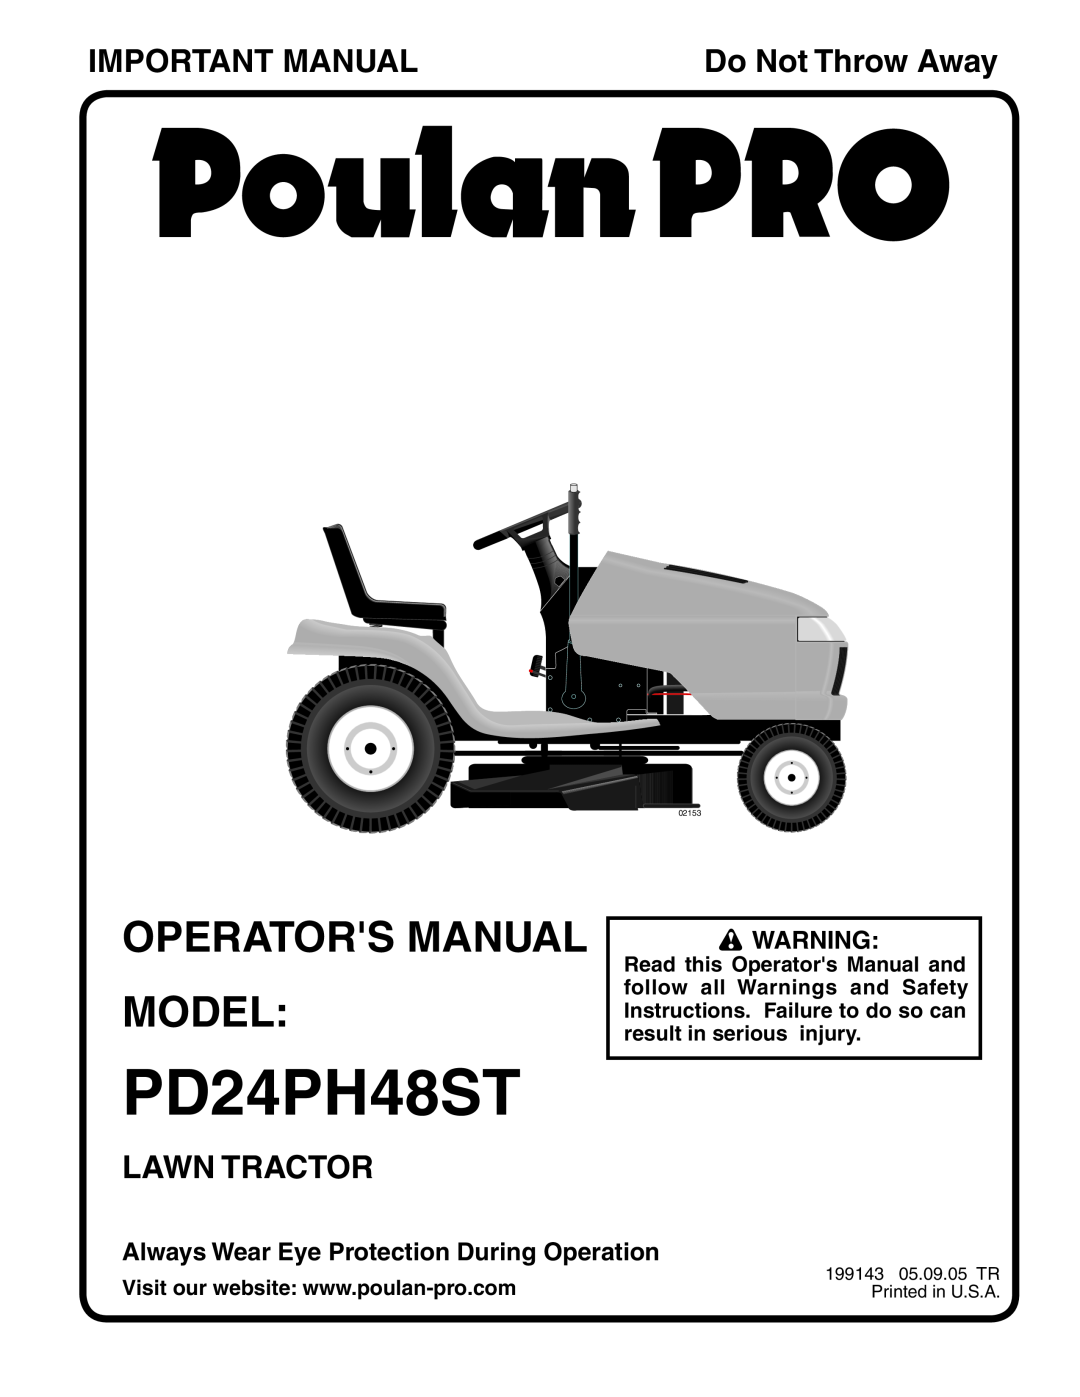 Poulan PD24PH48ST manual Operators Manual Model, Important Manual, Lawn Tractor, Do Not Throw Away, 02153 